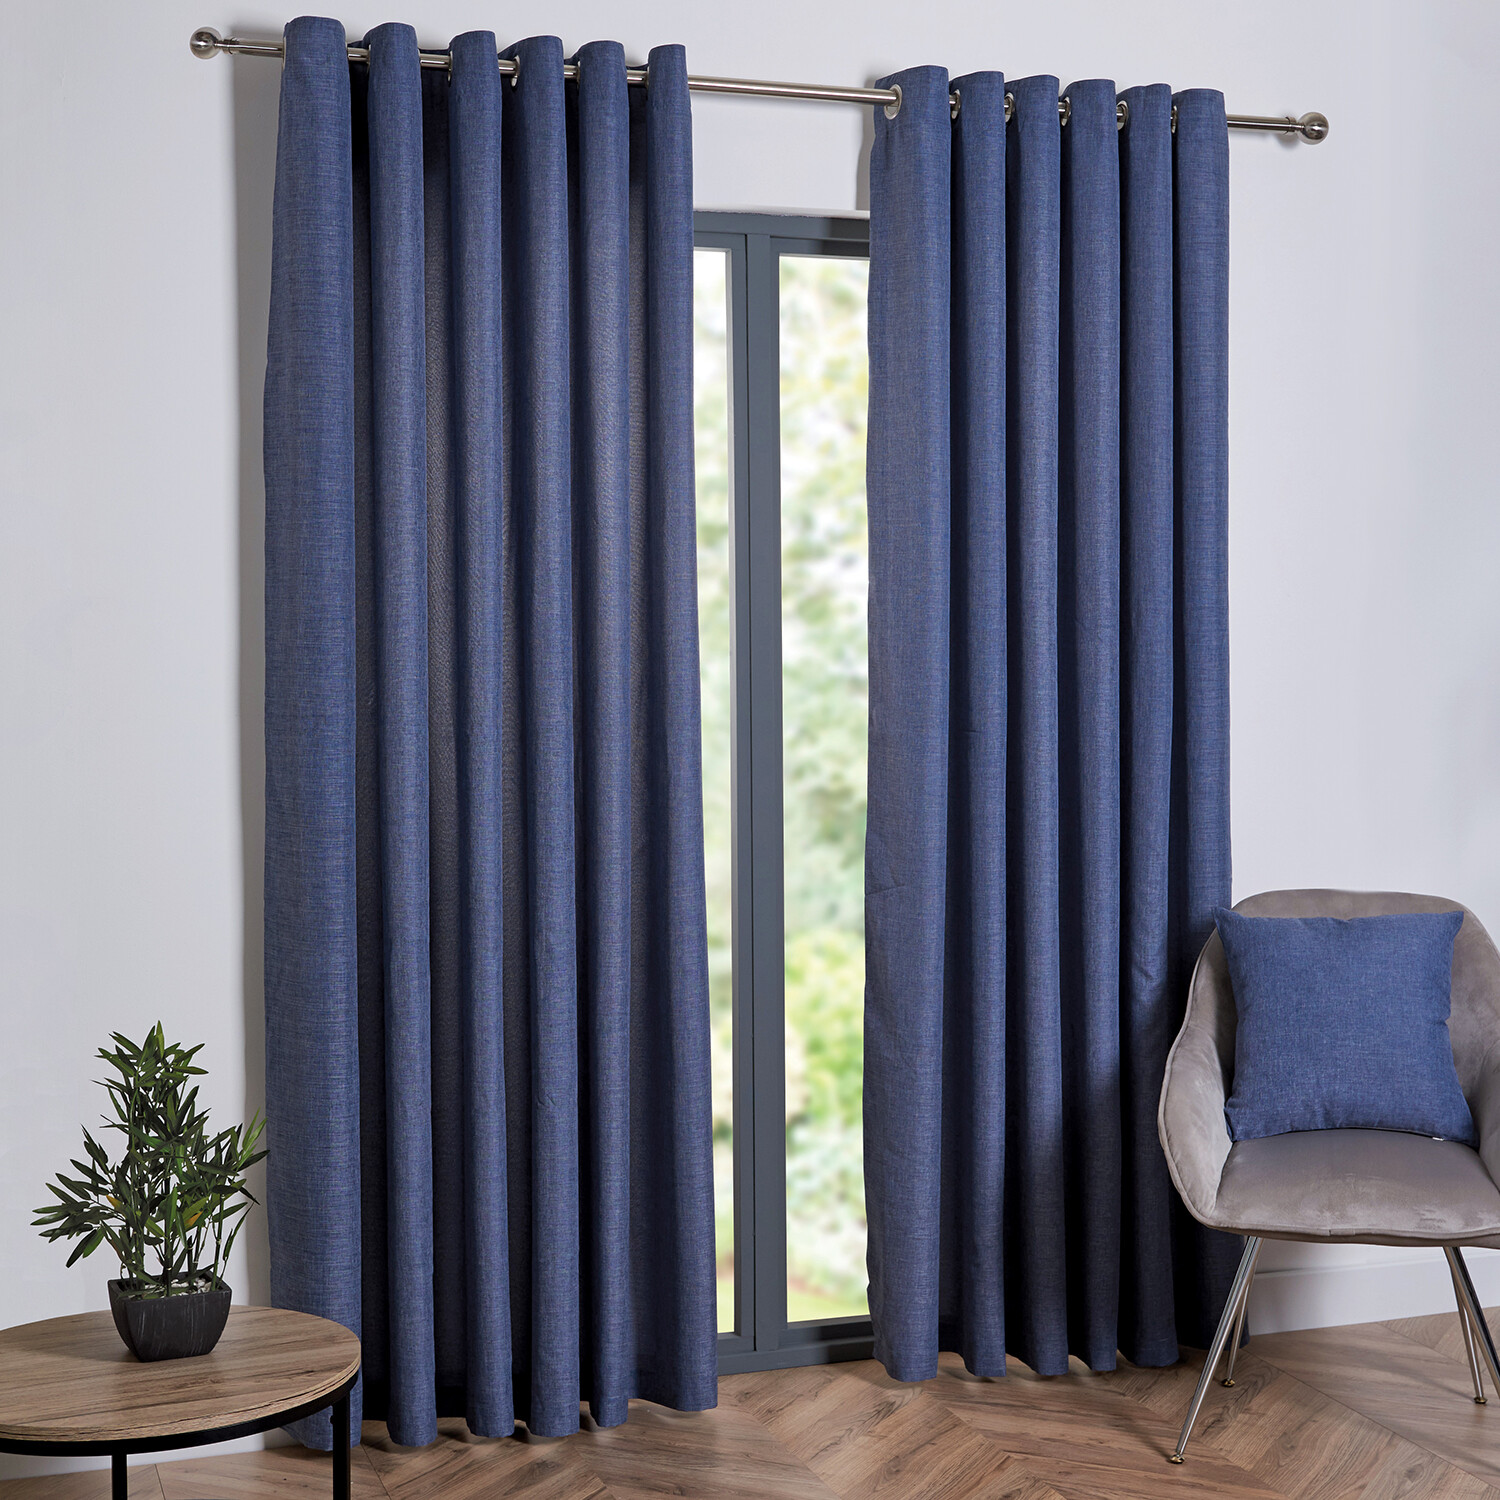 My Home Taylor Navy Eyelet Curtains 229 x 229cm Image 2